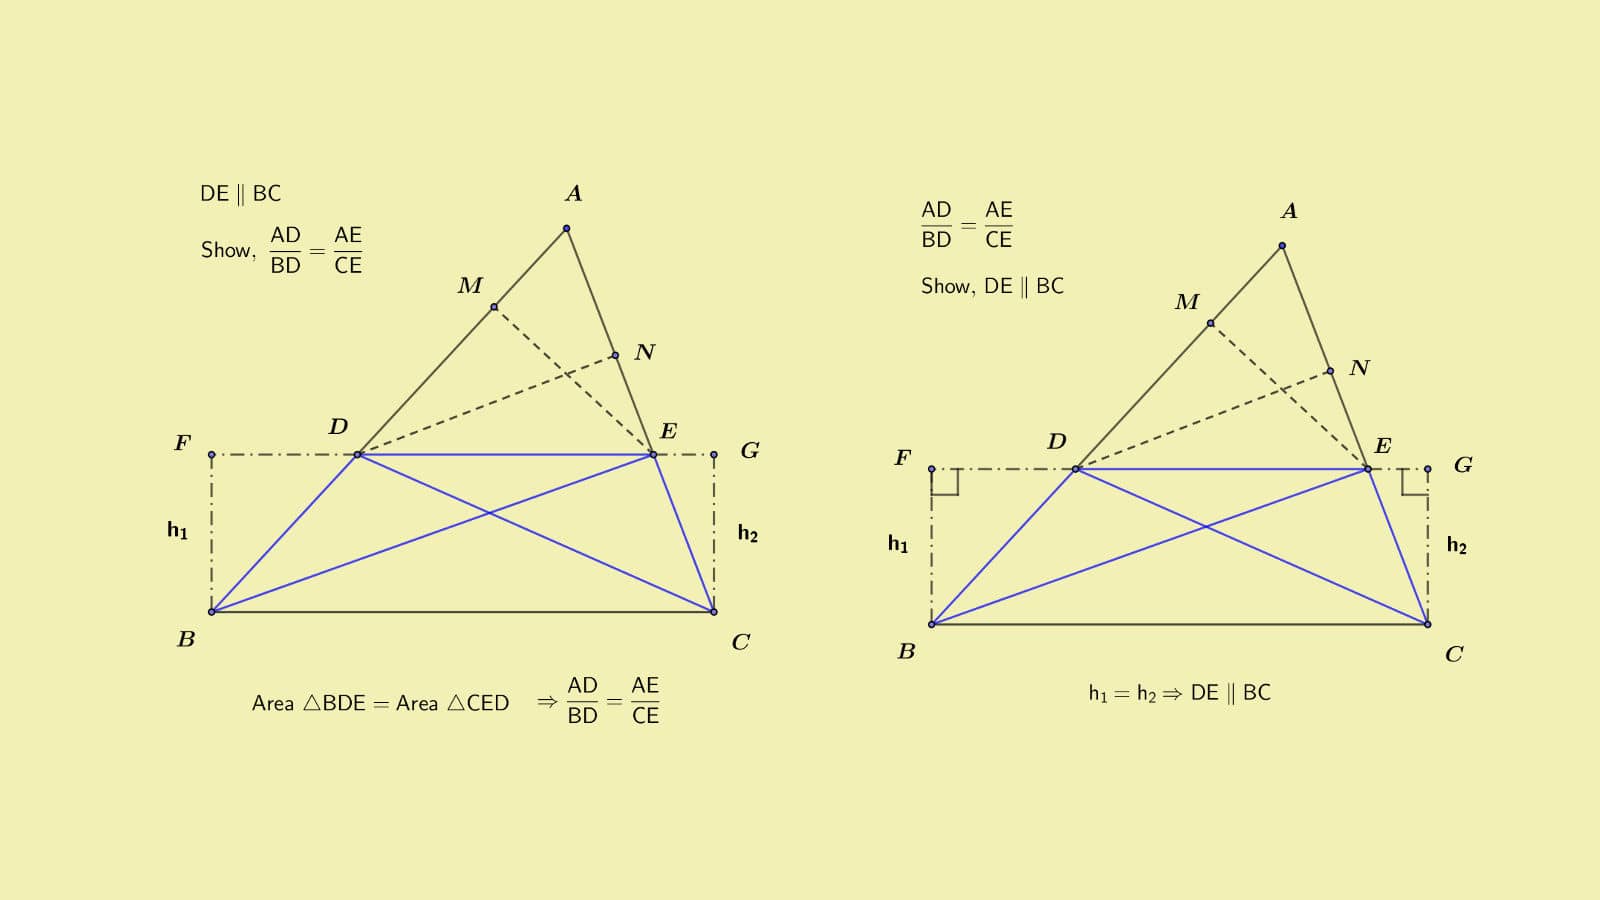  NCERT Solutions to Ex 6.2 Class 10 math on Results of Similarity of triangles